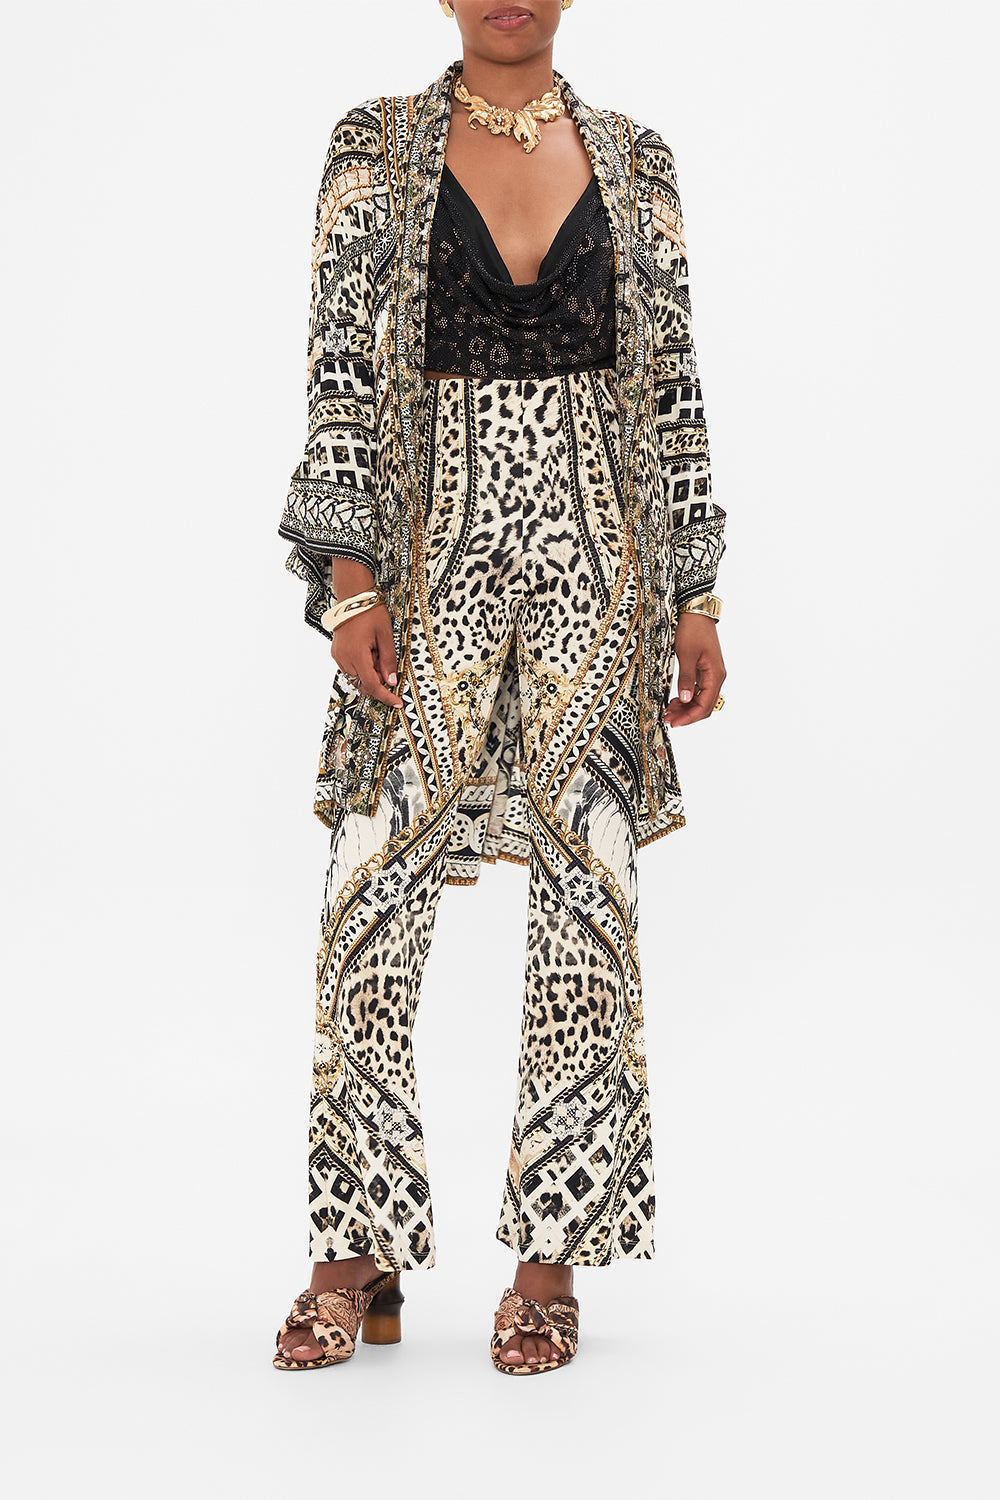 Style view of model wearing CAMILLA animal print robe in Mosaic Muse 